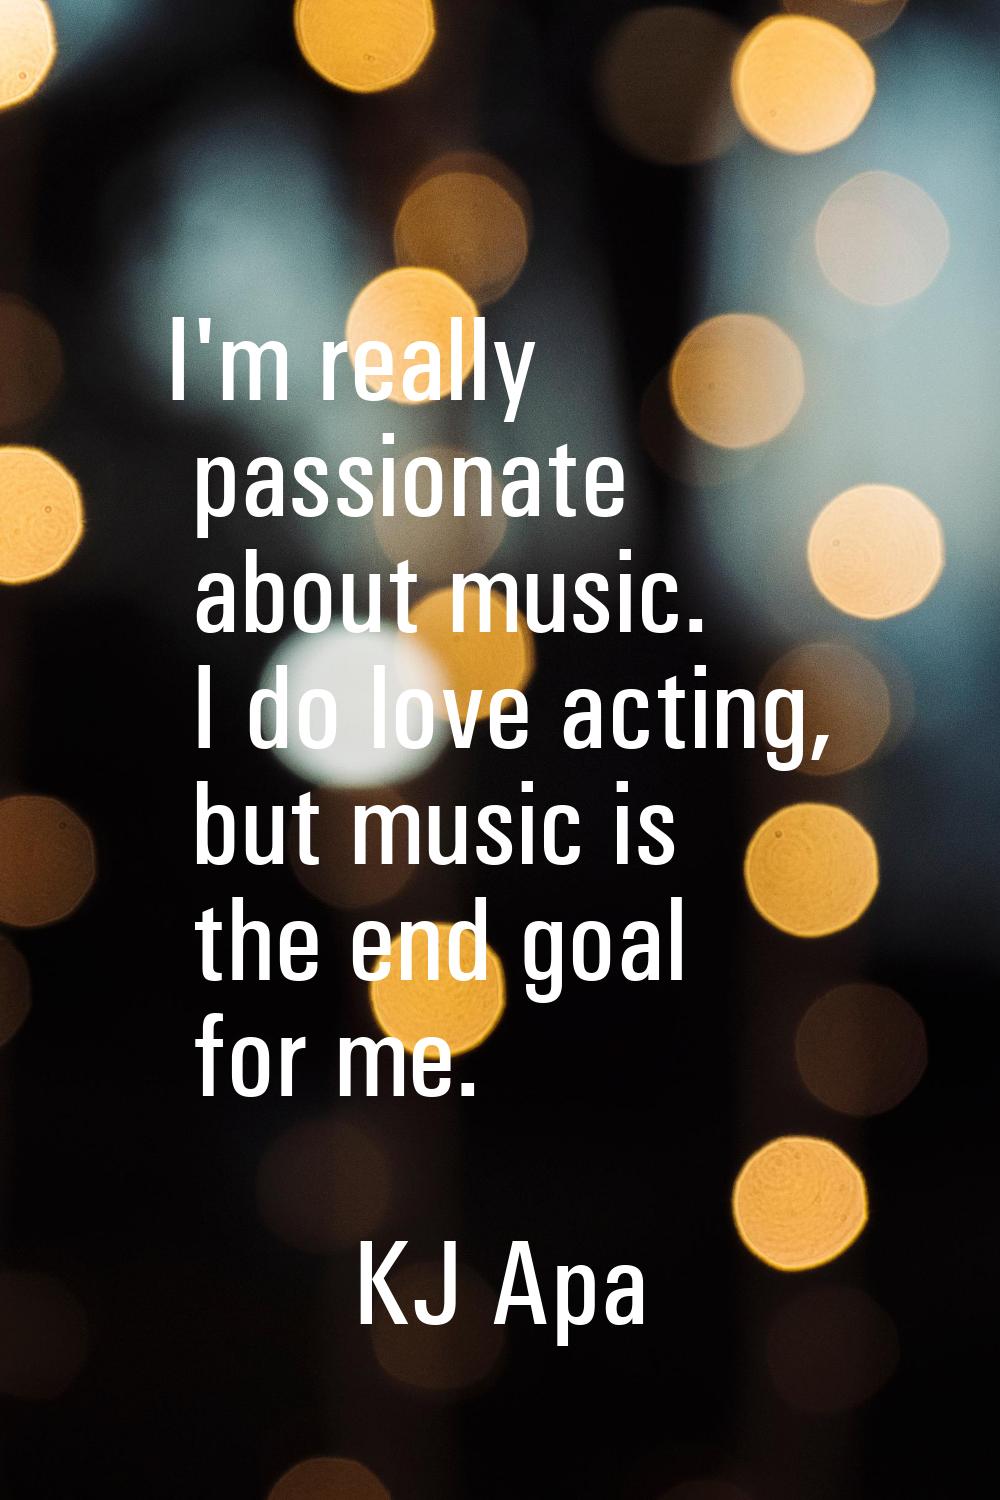 I'm really passionate about music. I do love acting, but music is the end goal for me.